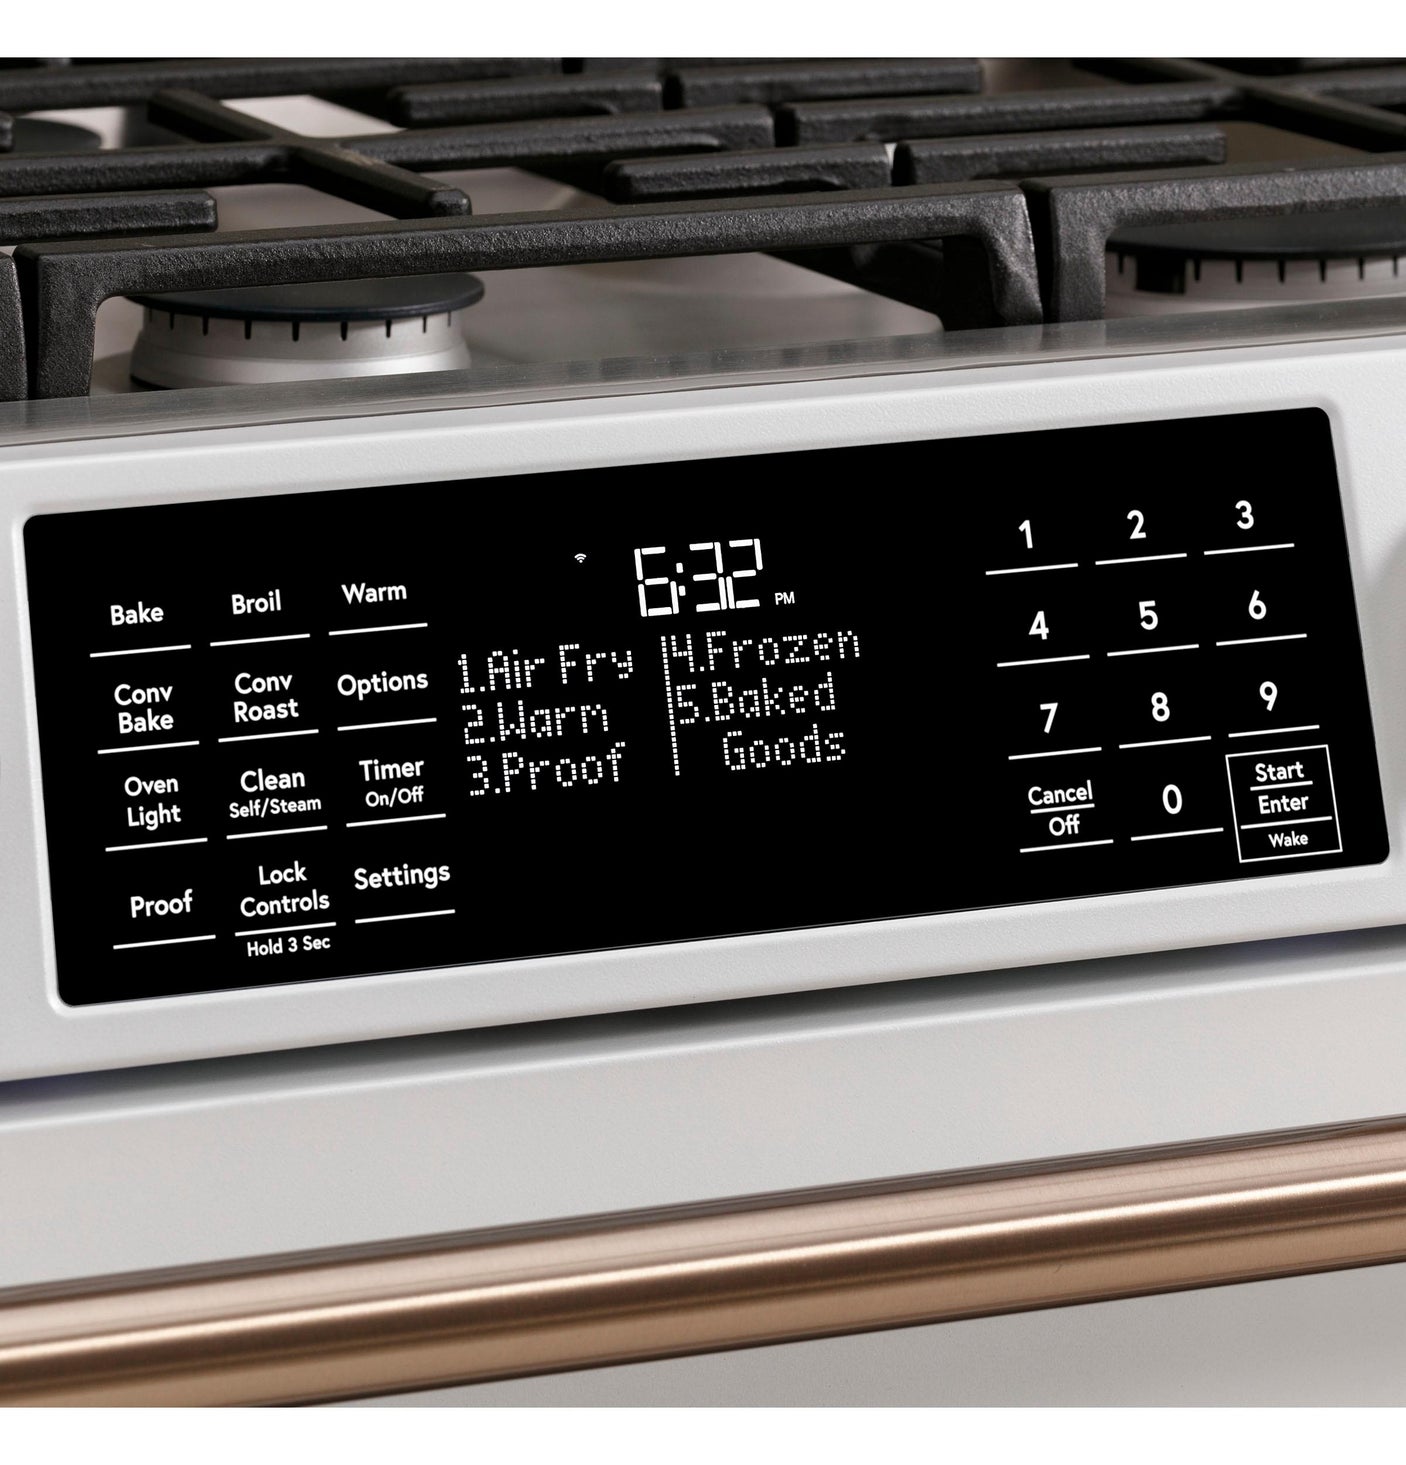 Café™ 30" Smart Slide-In, Front-Control, Dual-Fuel Range with Warming Drawer